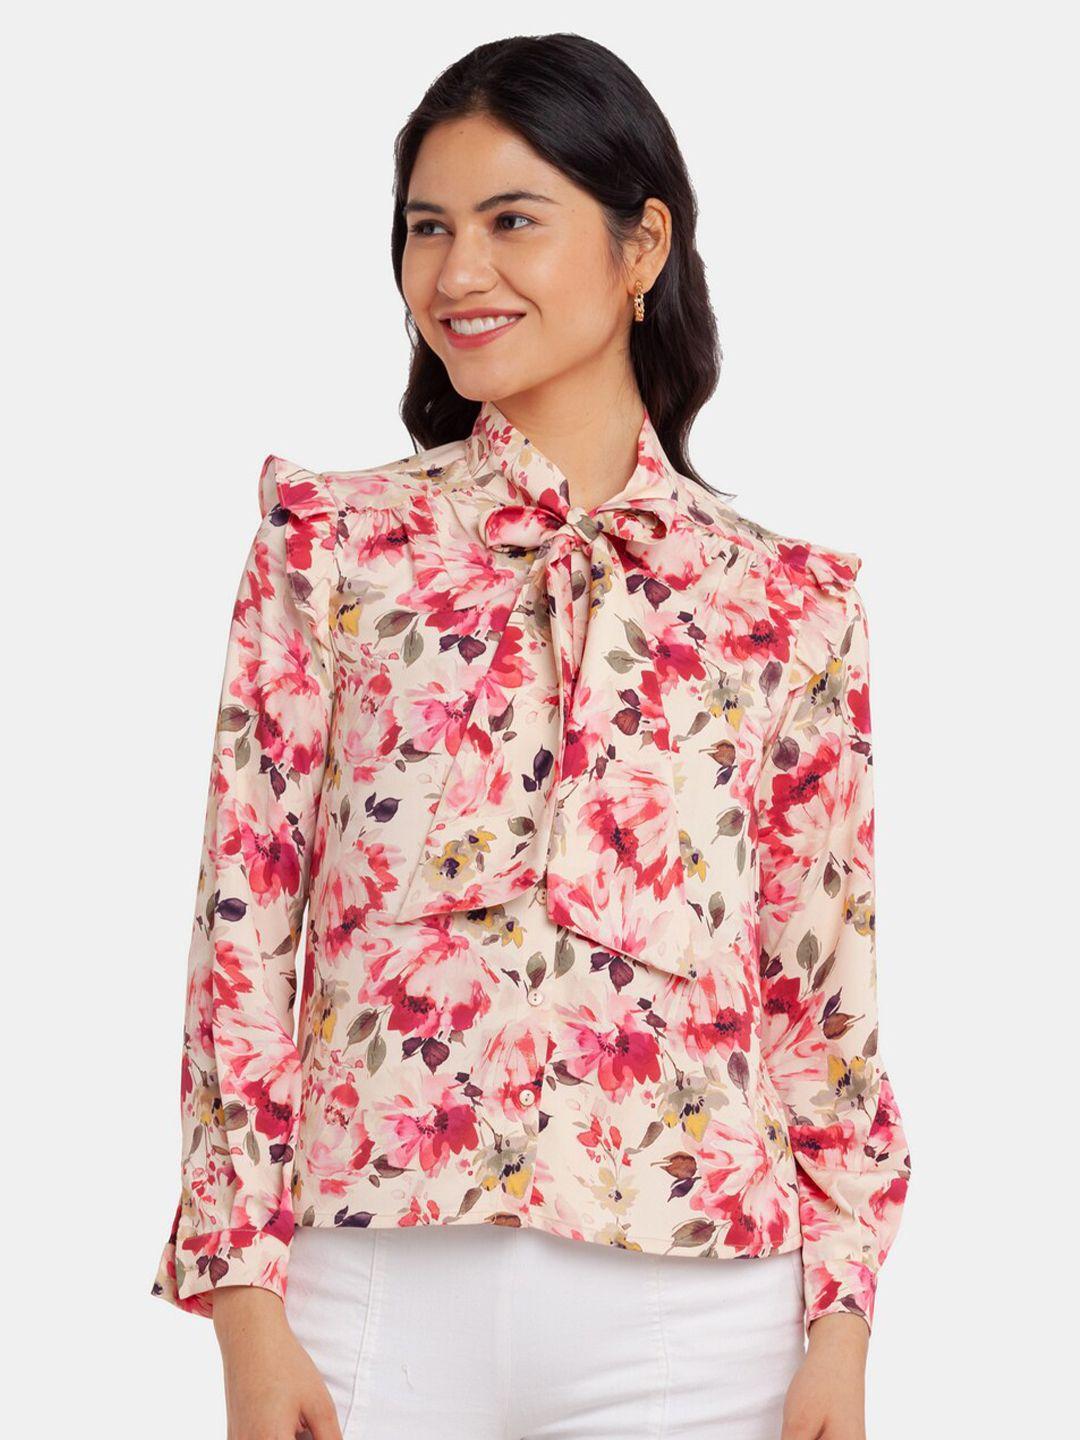 zink london women off white floral print shirt style top